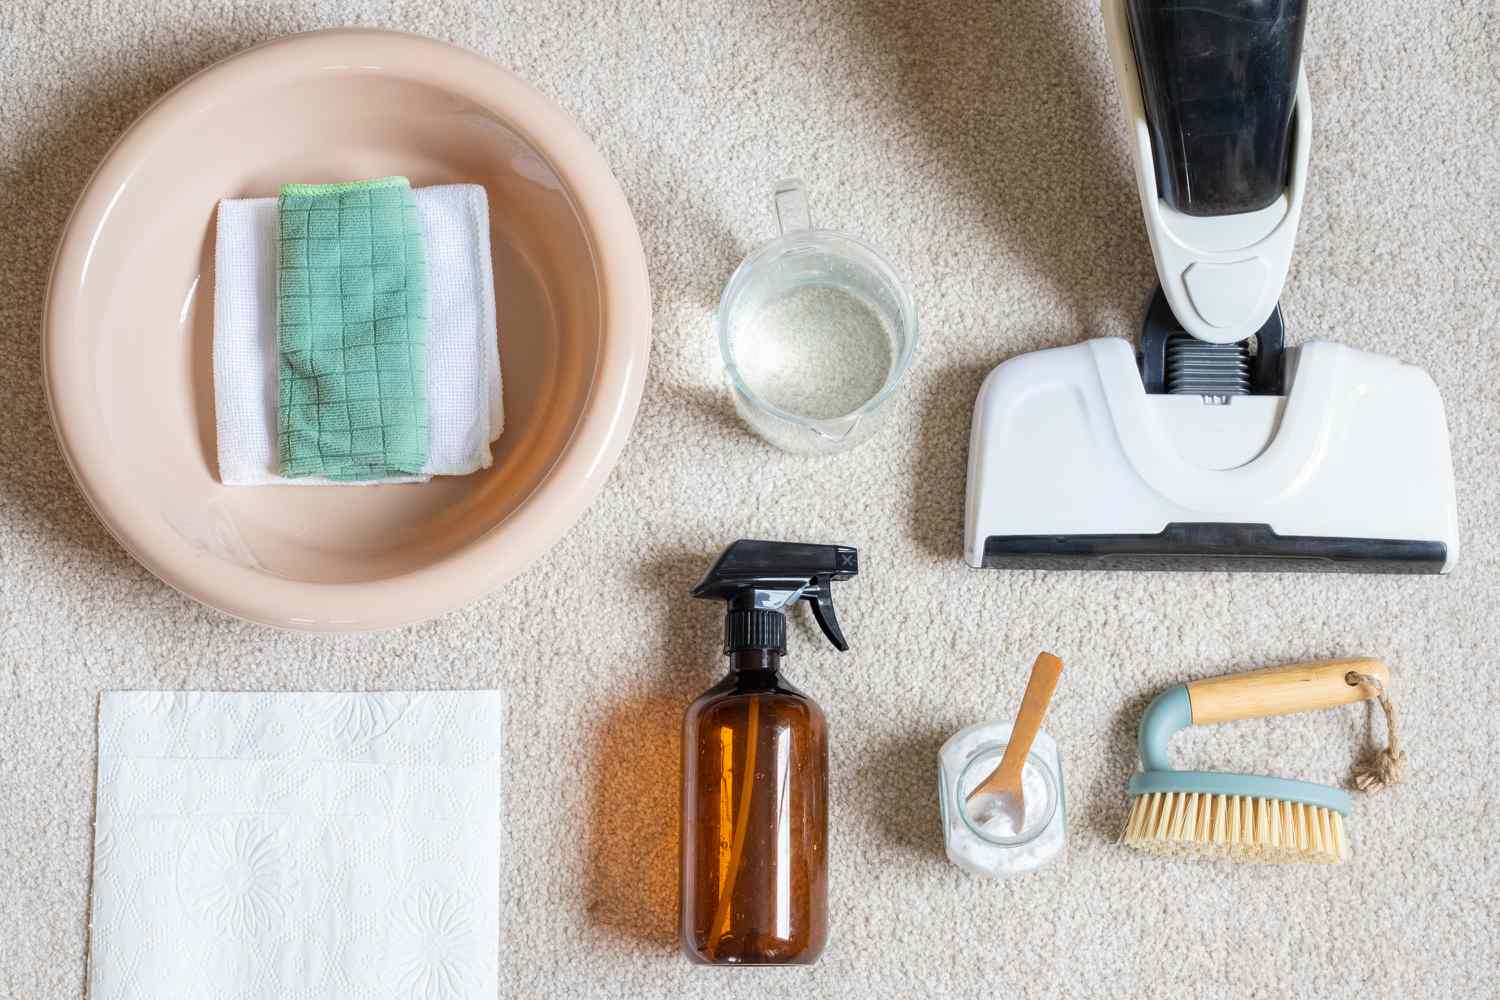 How To Clean A Carpet With Baking Soda And Hydrogen Peroxide